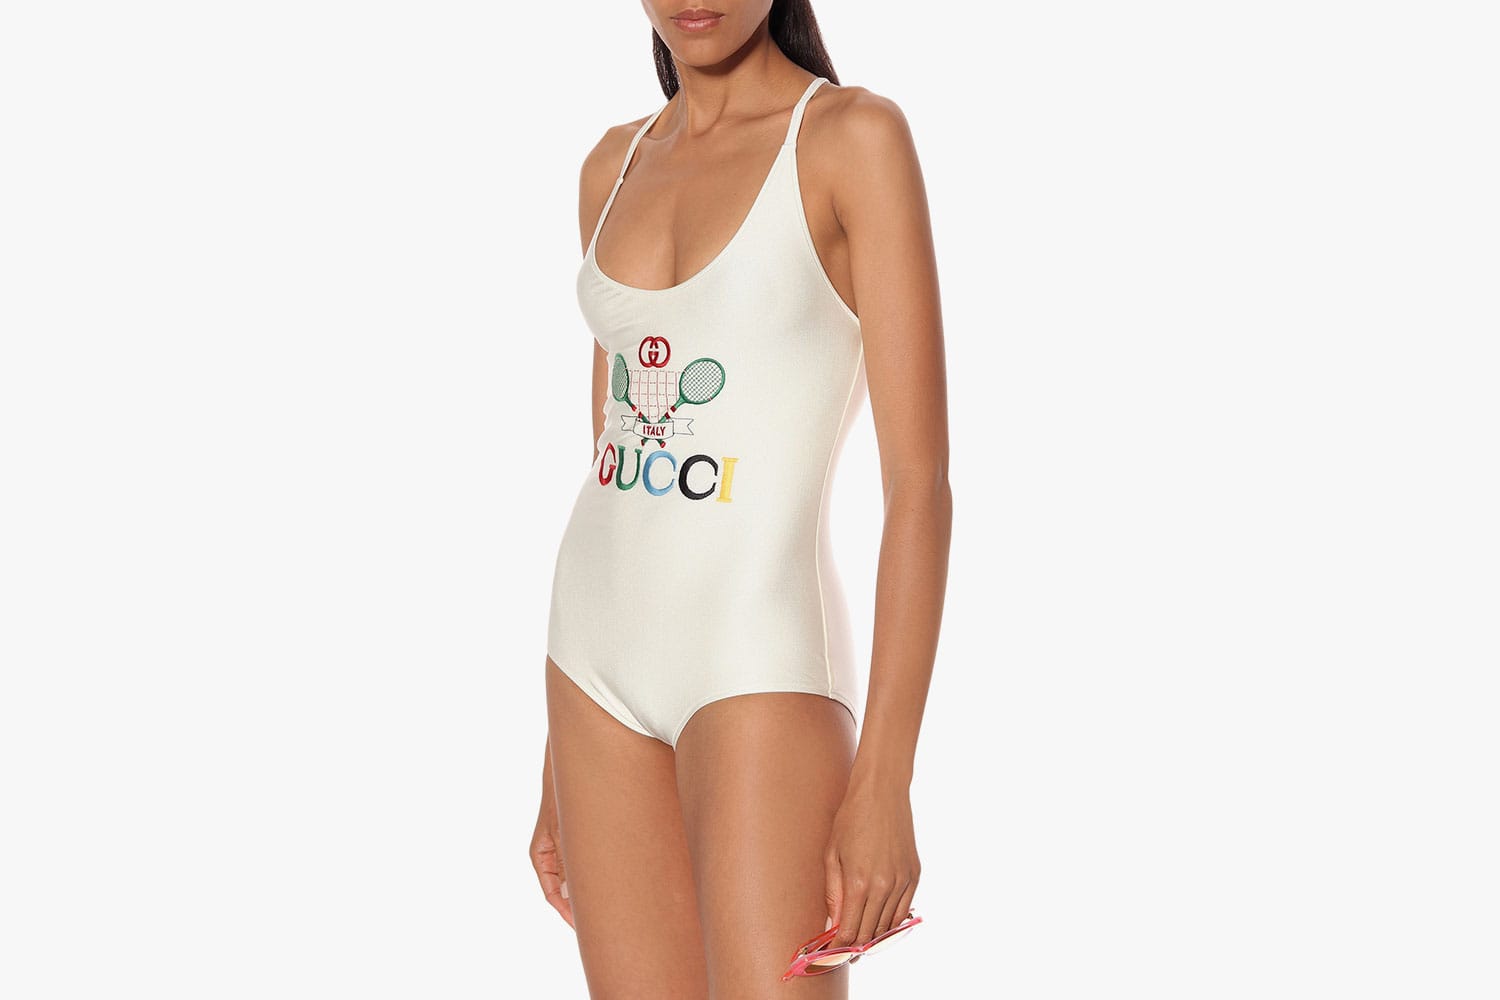 gucci bathing suits